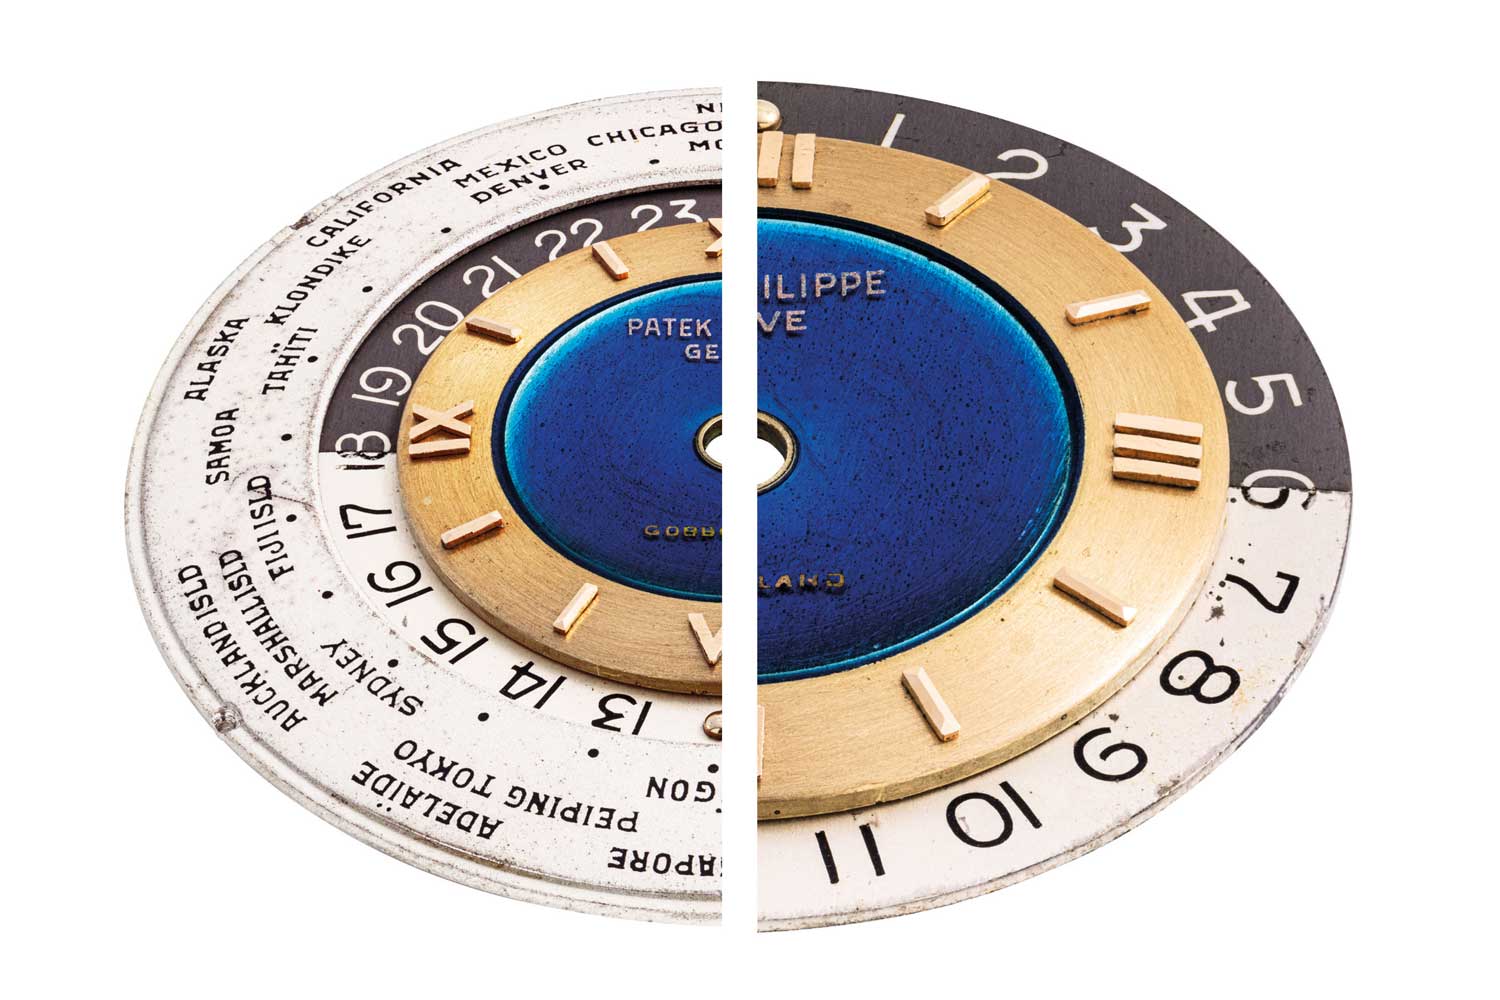 This ref. 2523 with a stunning double-signed dial with blue enamel at the center was sold by Christie’s in 2019 for a staggering USD 9 million. (Image: Christie’s)